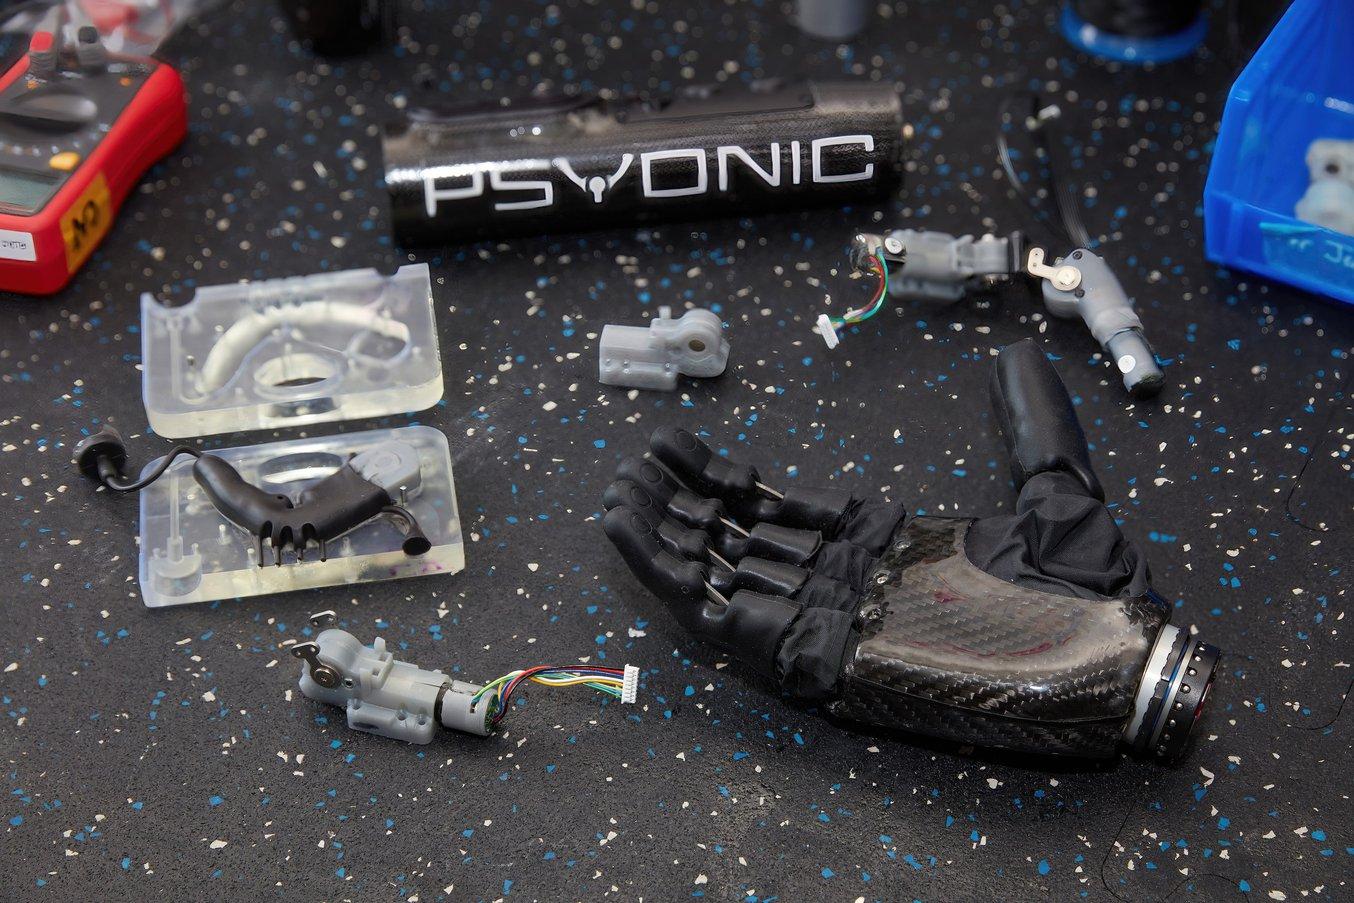 Psyonic uses silicone insert molding to create fingers for prosthetic hands.